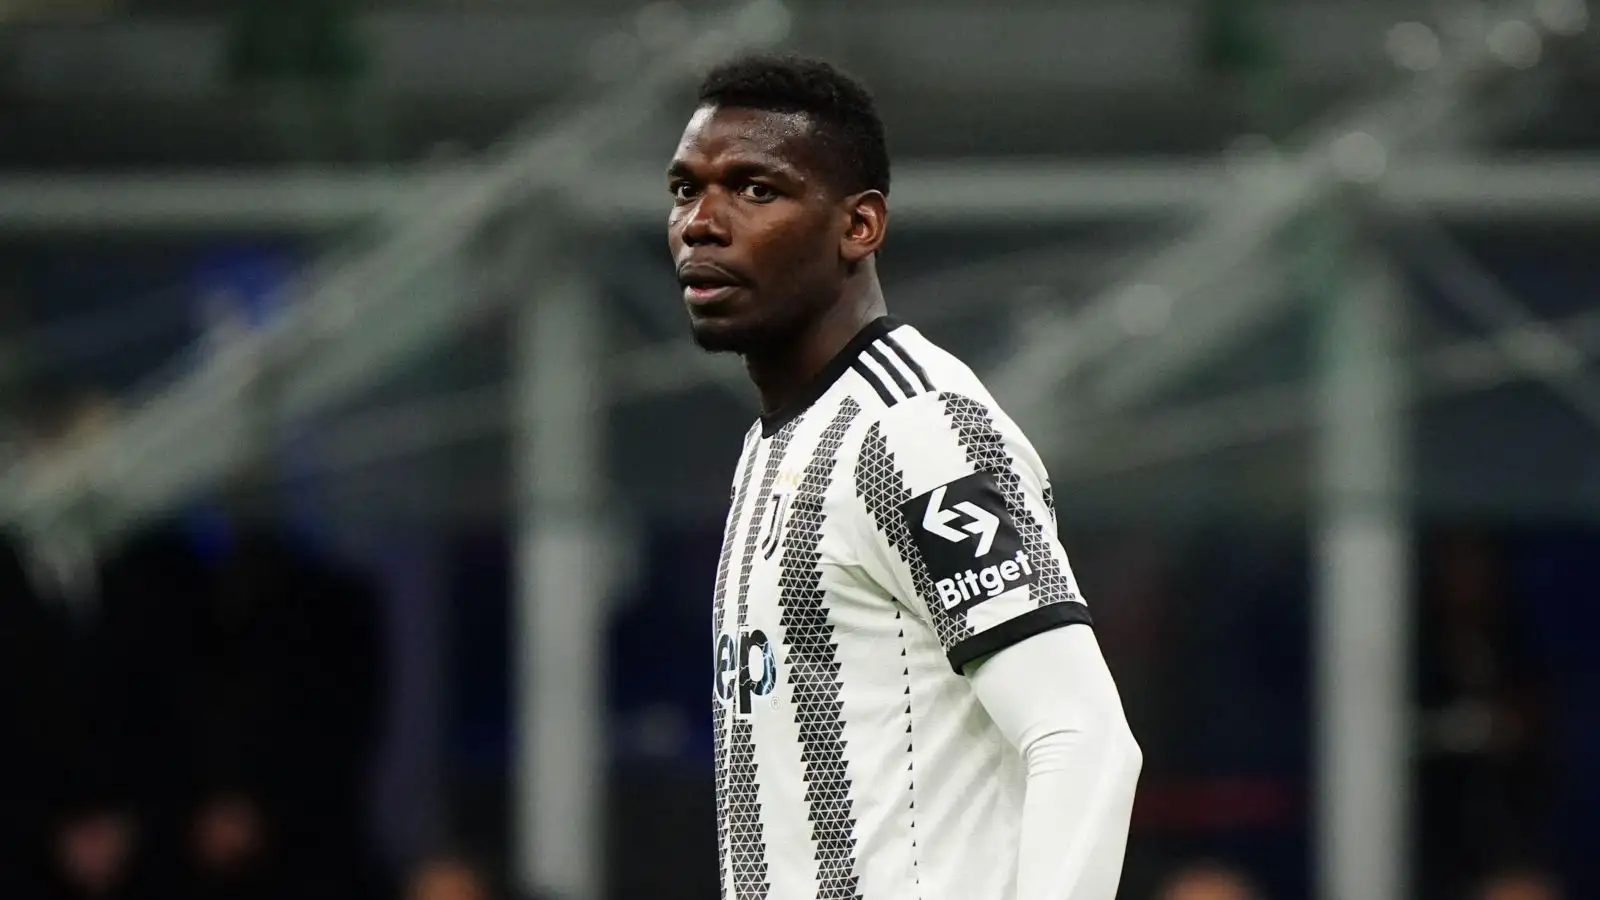 Pogba ‘hurt’ by ‘angry’ ex-Man Utd star’s accusation as ‘Carrington sources’ reveal extent of lateness